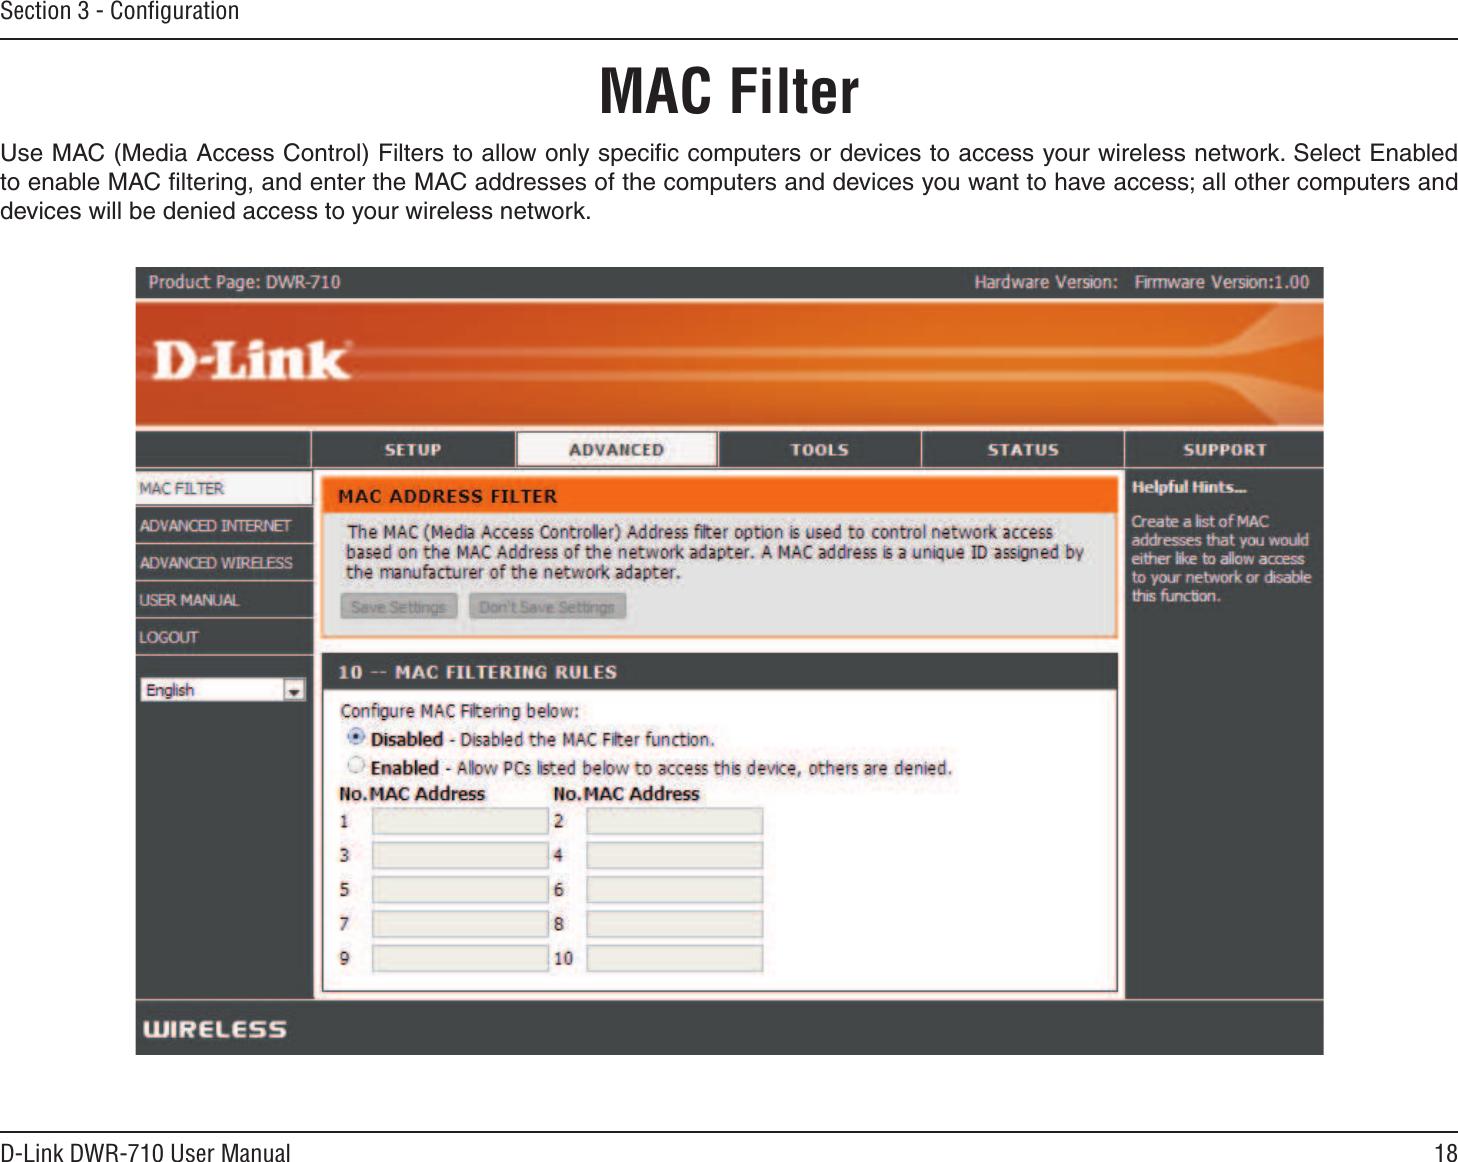 18D-Link DWR-710 User ManualSection 3 - ConﬁgurationMAC FilterUse MAC (Media Access Control) Filters to allow only speciﬁc computers or devices to access your wireless network. Select Enabled to enable MAC ﬁltering, and enter the MAC addresses of the computers and devices you want to have access; all other computers and devices will be denied access to your wireless network.